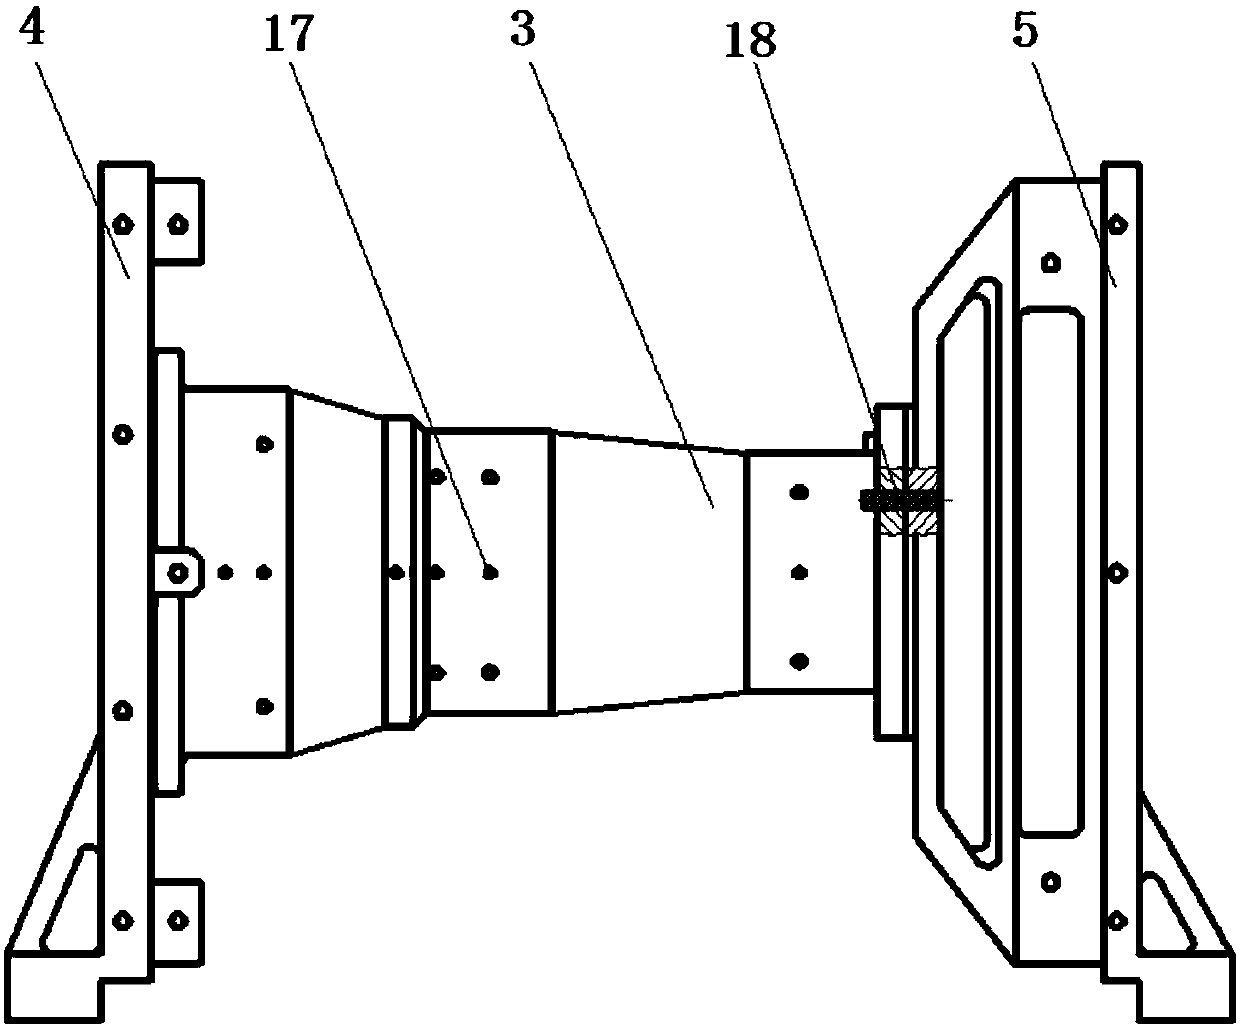 Spatial camera with surrounding support type electronics assembly